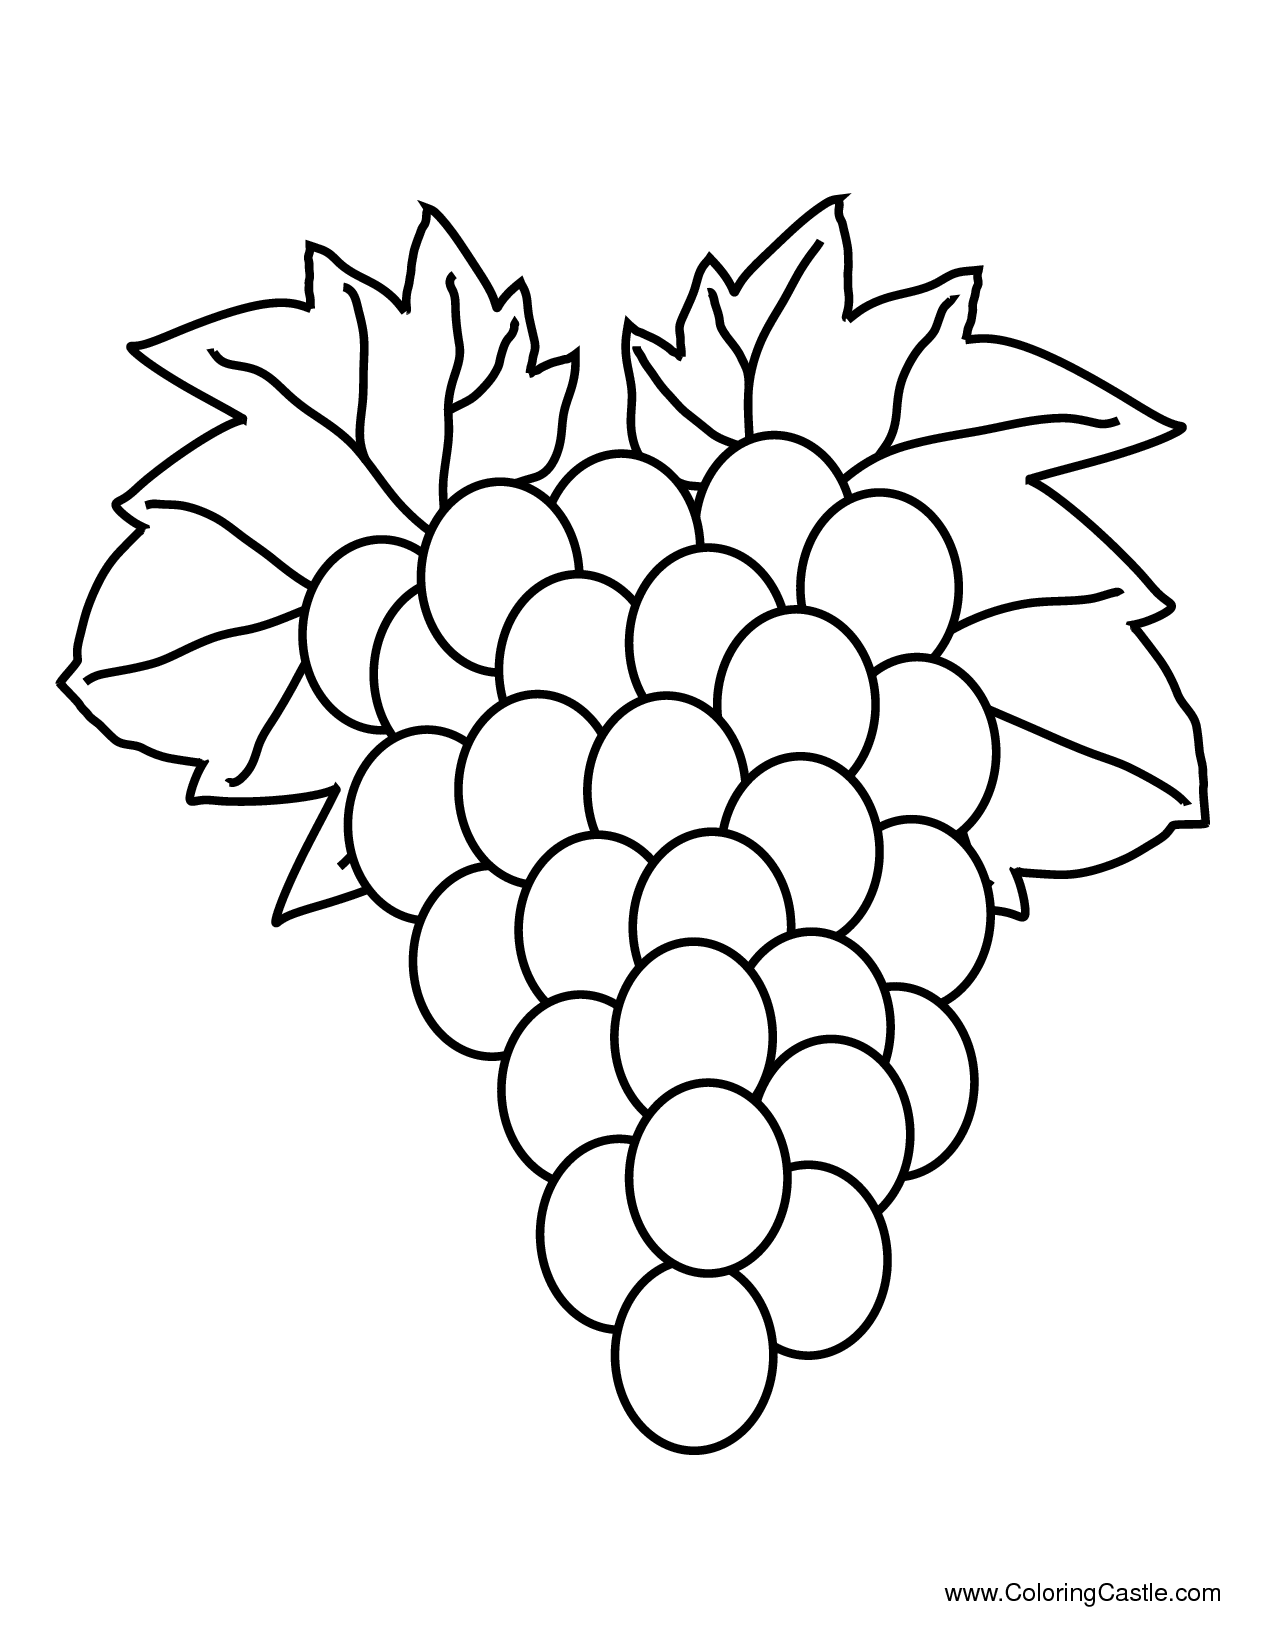 4 Best Images of Grapes Template Printable - Grape Template Coloring ...